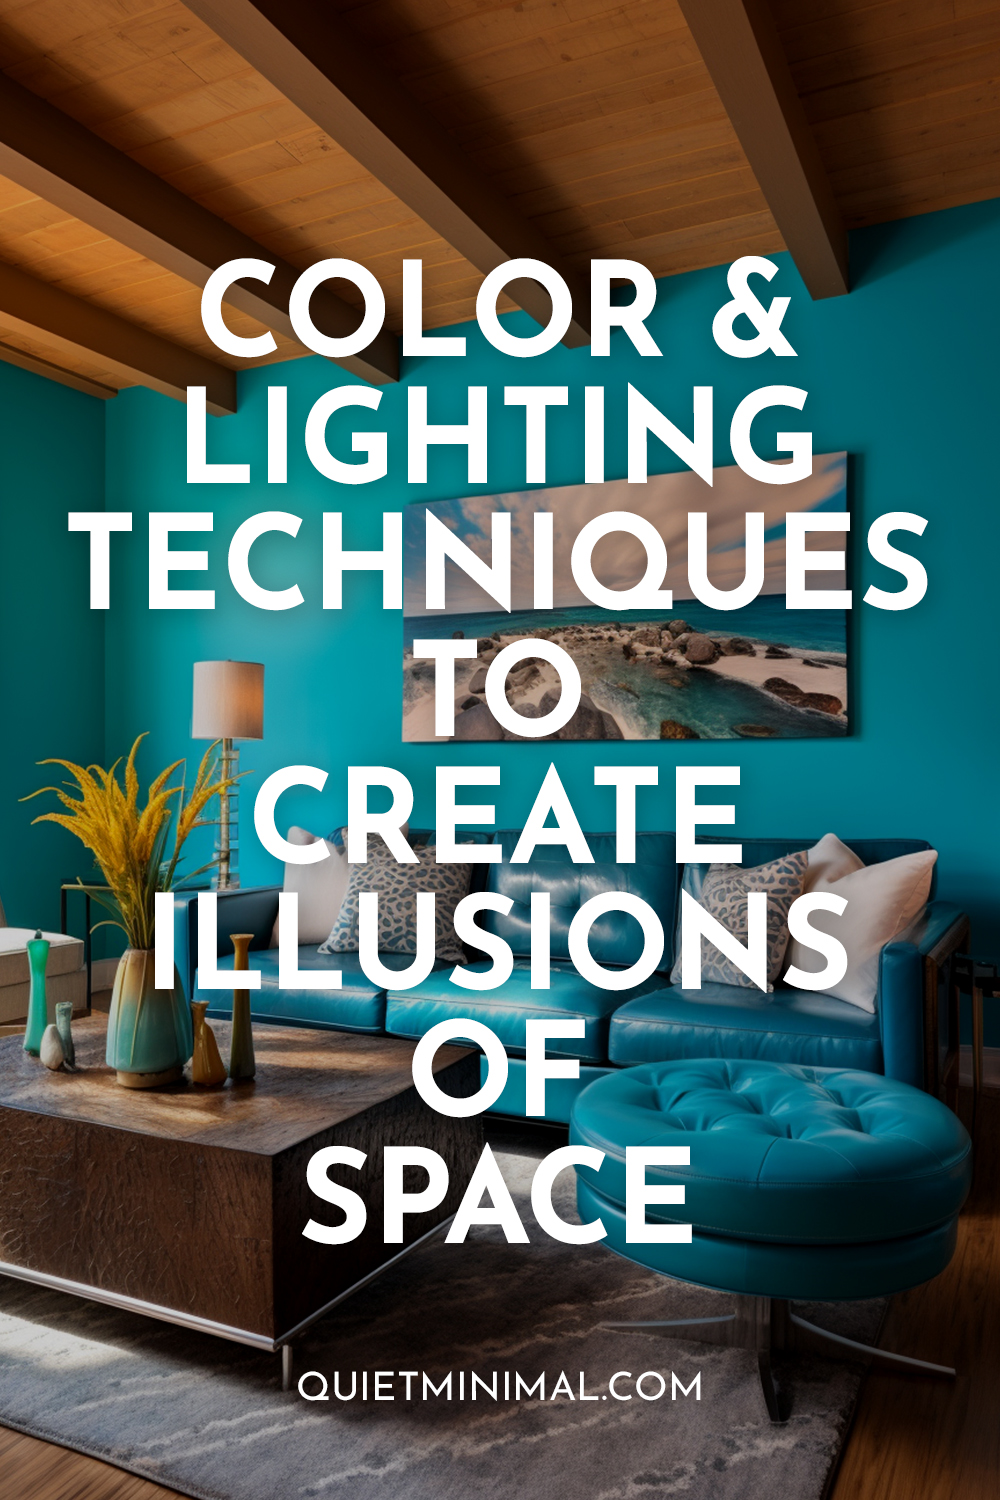 Using color and lighting techniques to create stunning illusions of space.